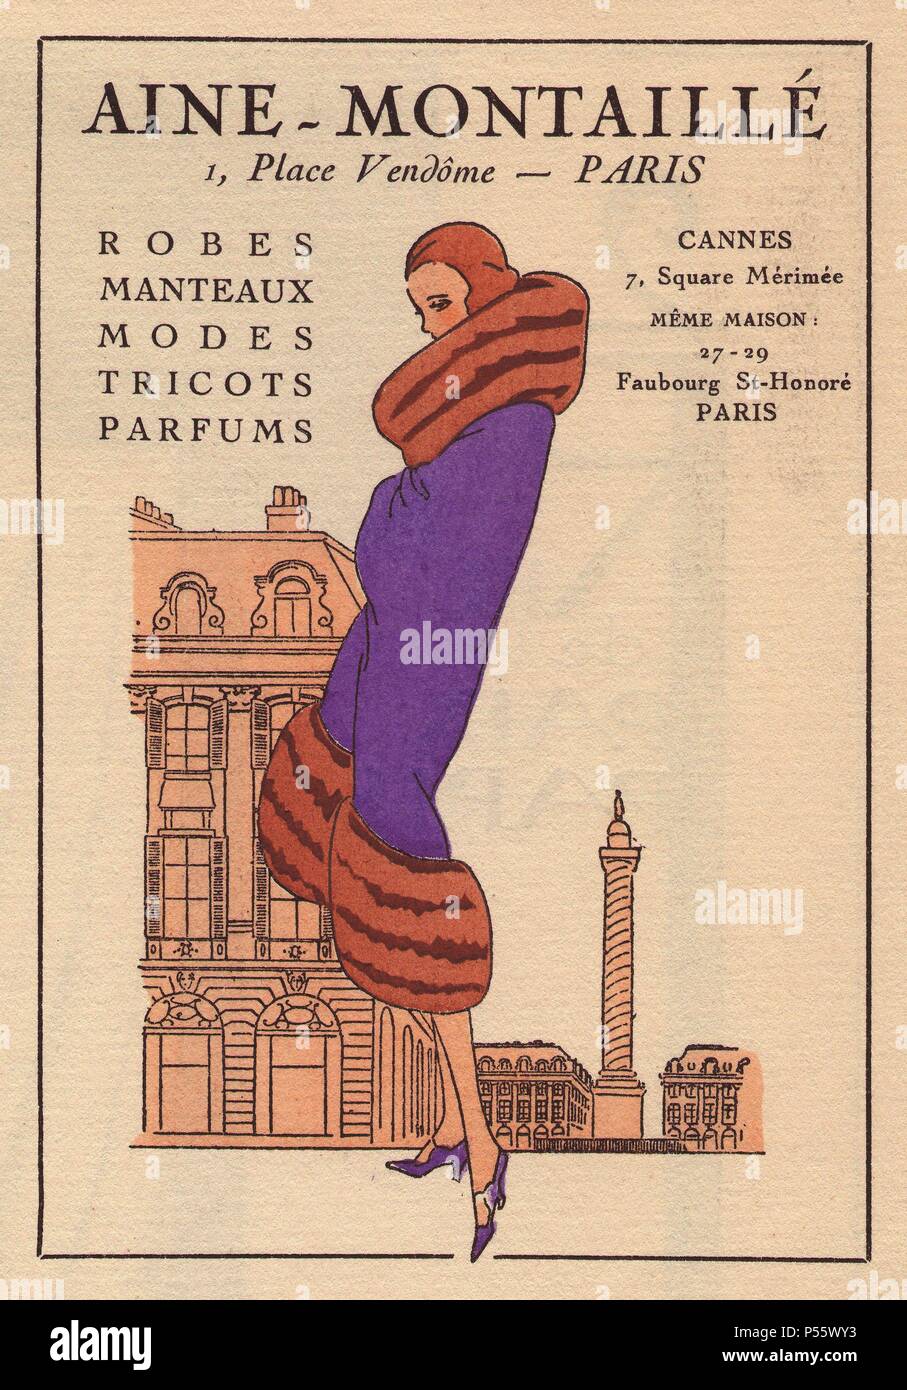 Advertisement from AGB 1930: for Paris fashion house Aine-Montaille showing a woman in a purple coat with luxurious fur trim.. Handcolored pochoir (stencil) lithograph from the French luxury fashion magazine 'Art, Gout, Beaute' 1930. Stock Photo